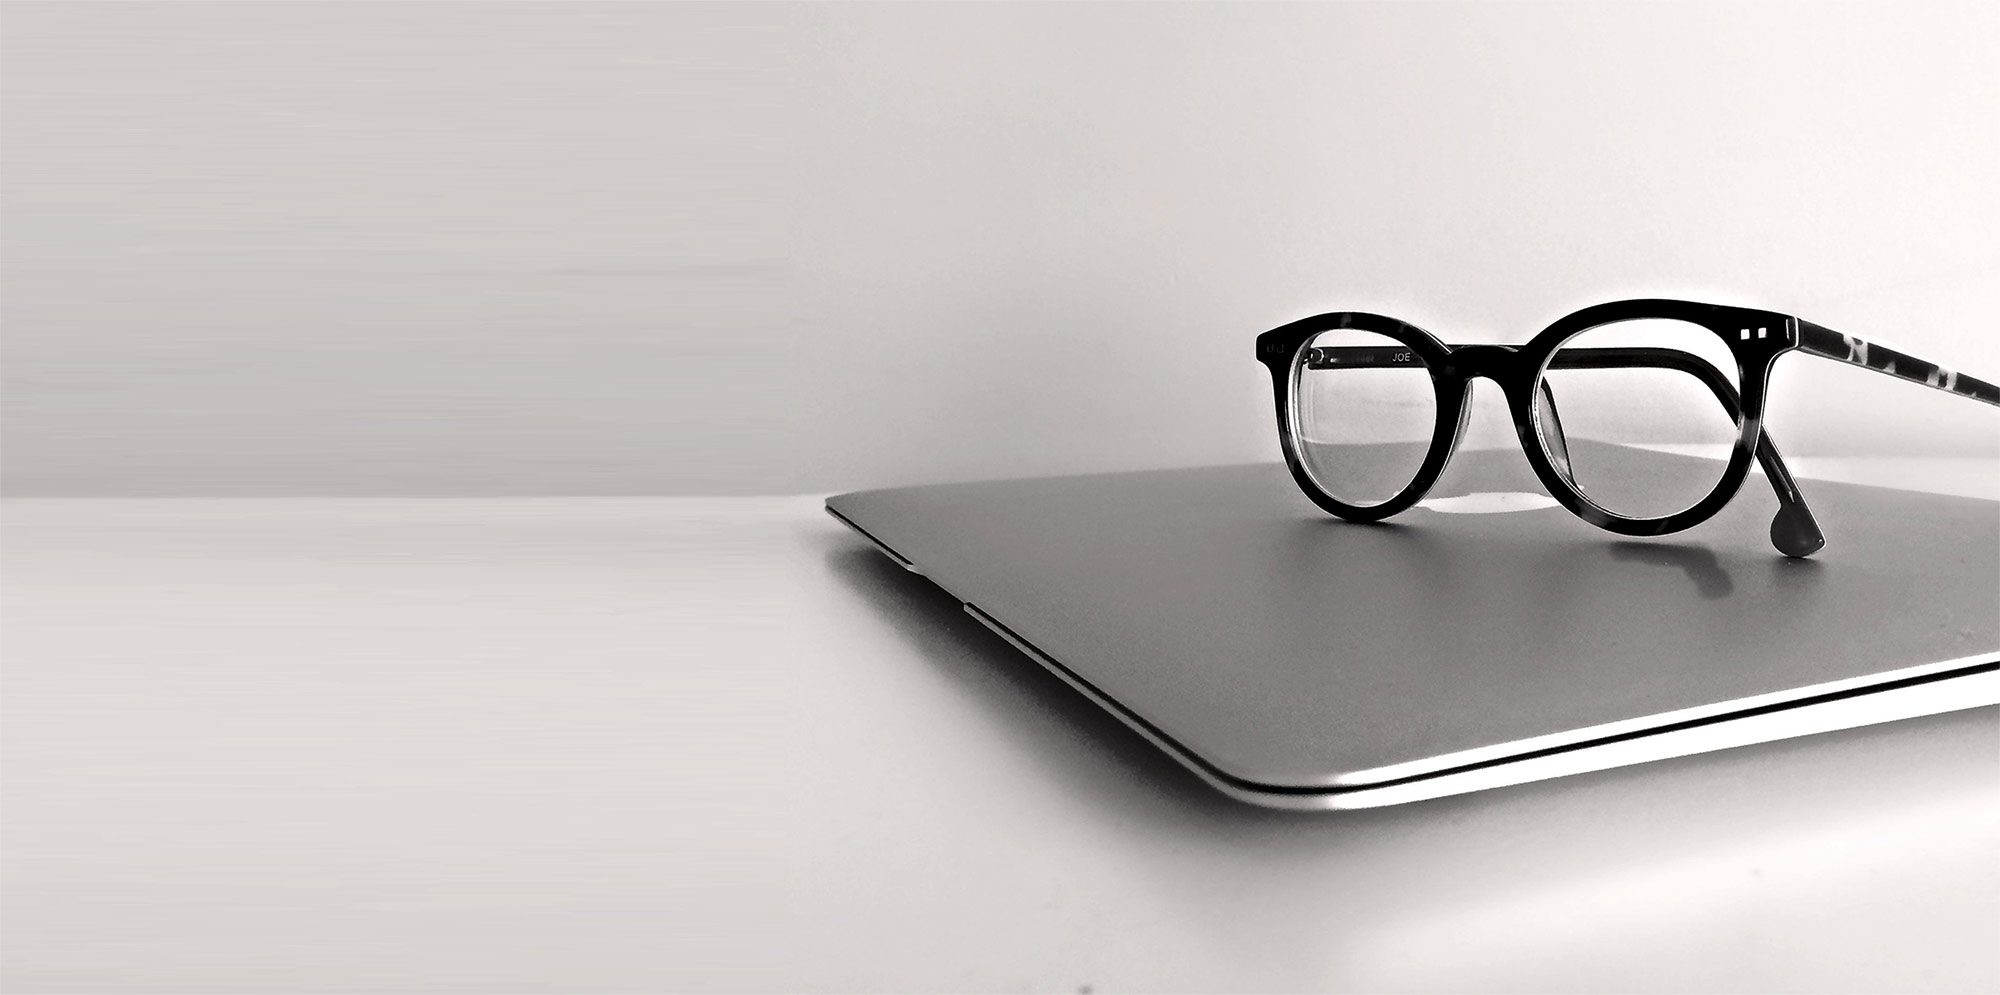 Laptop with reading glasses on top